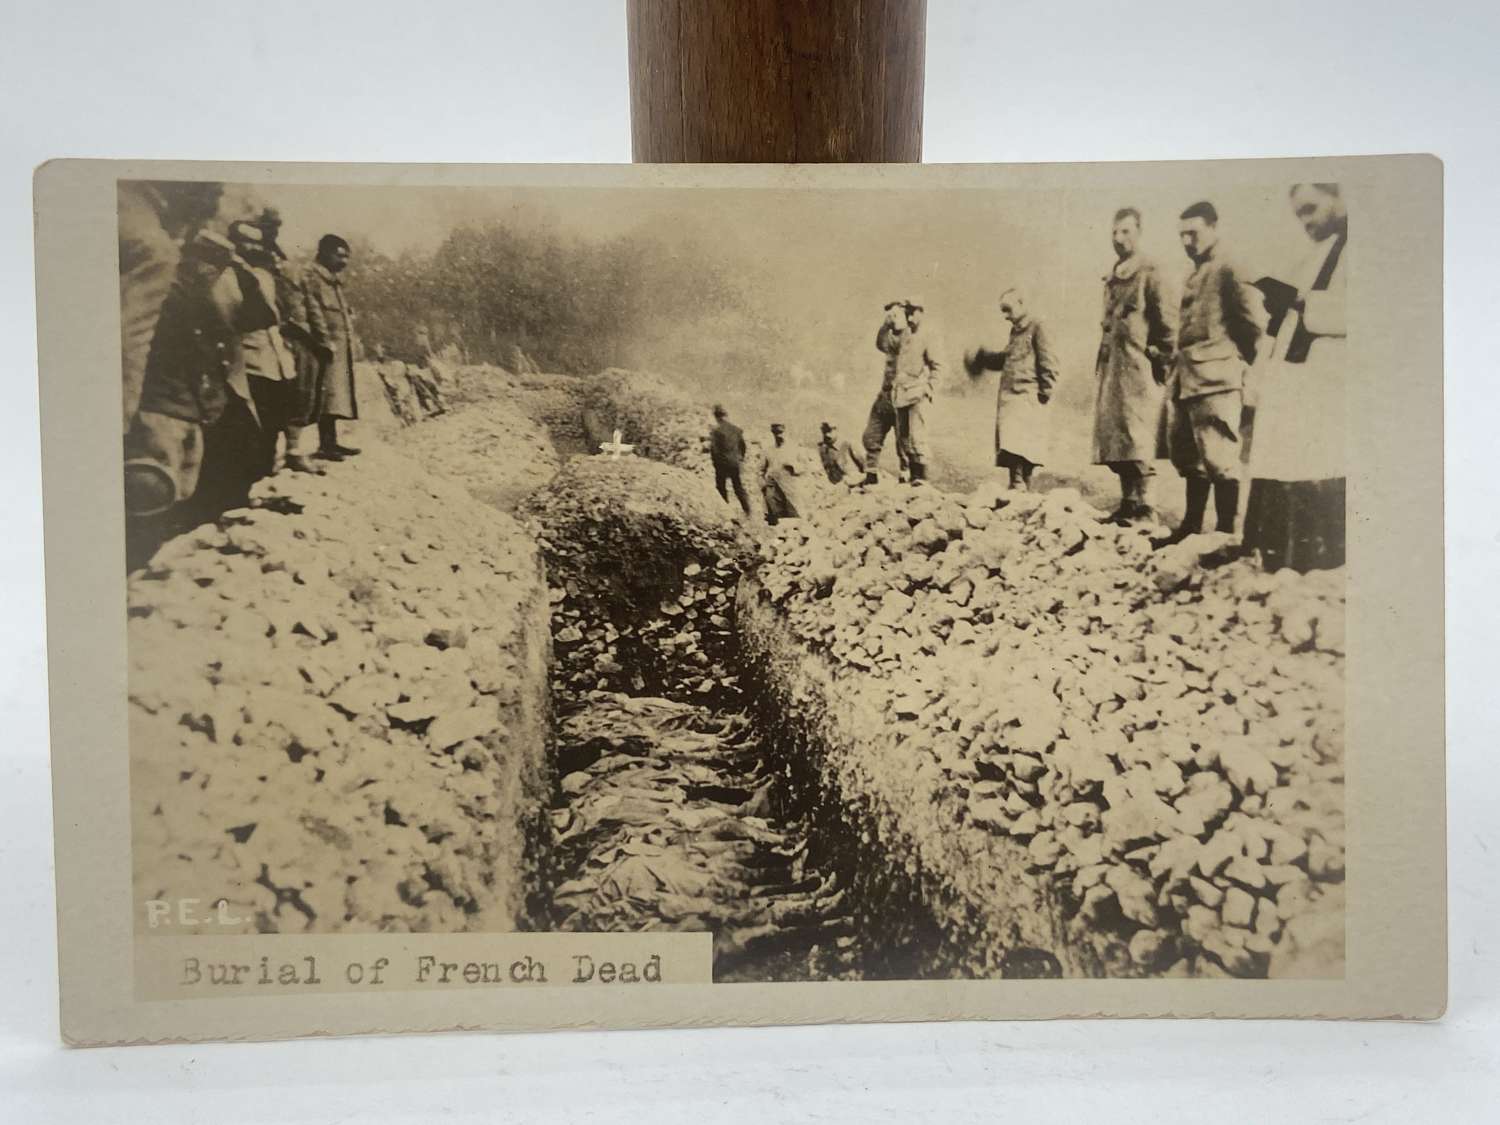 WW1 Burial Of French Dead Photograph Postcard